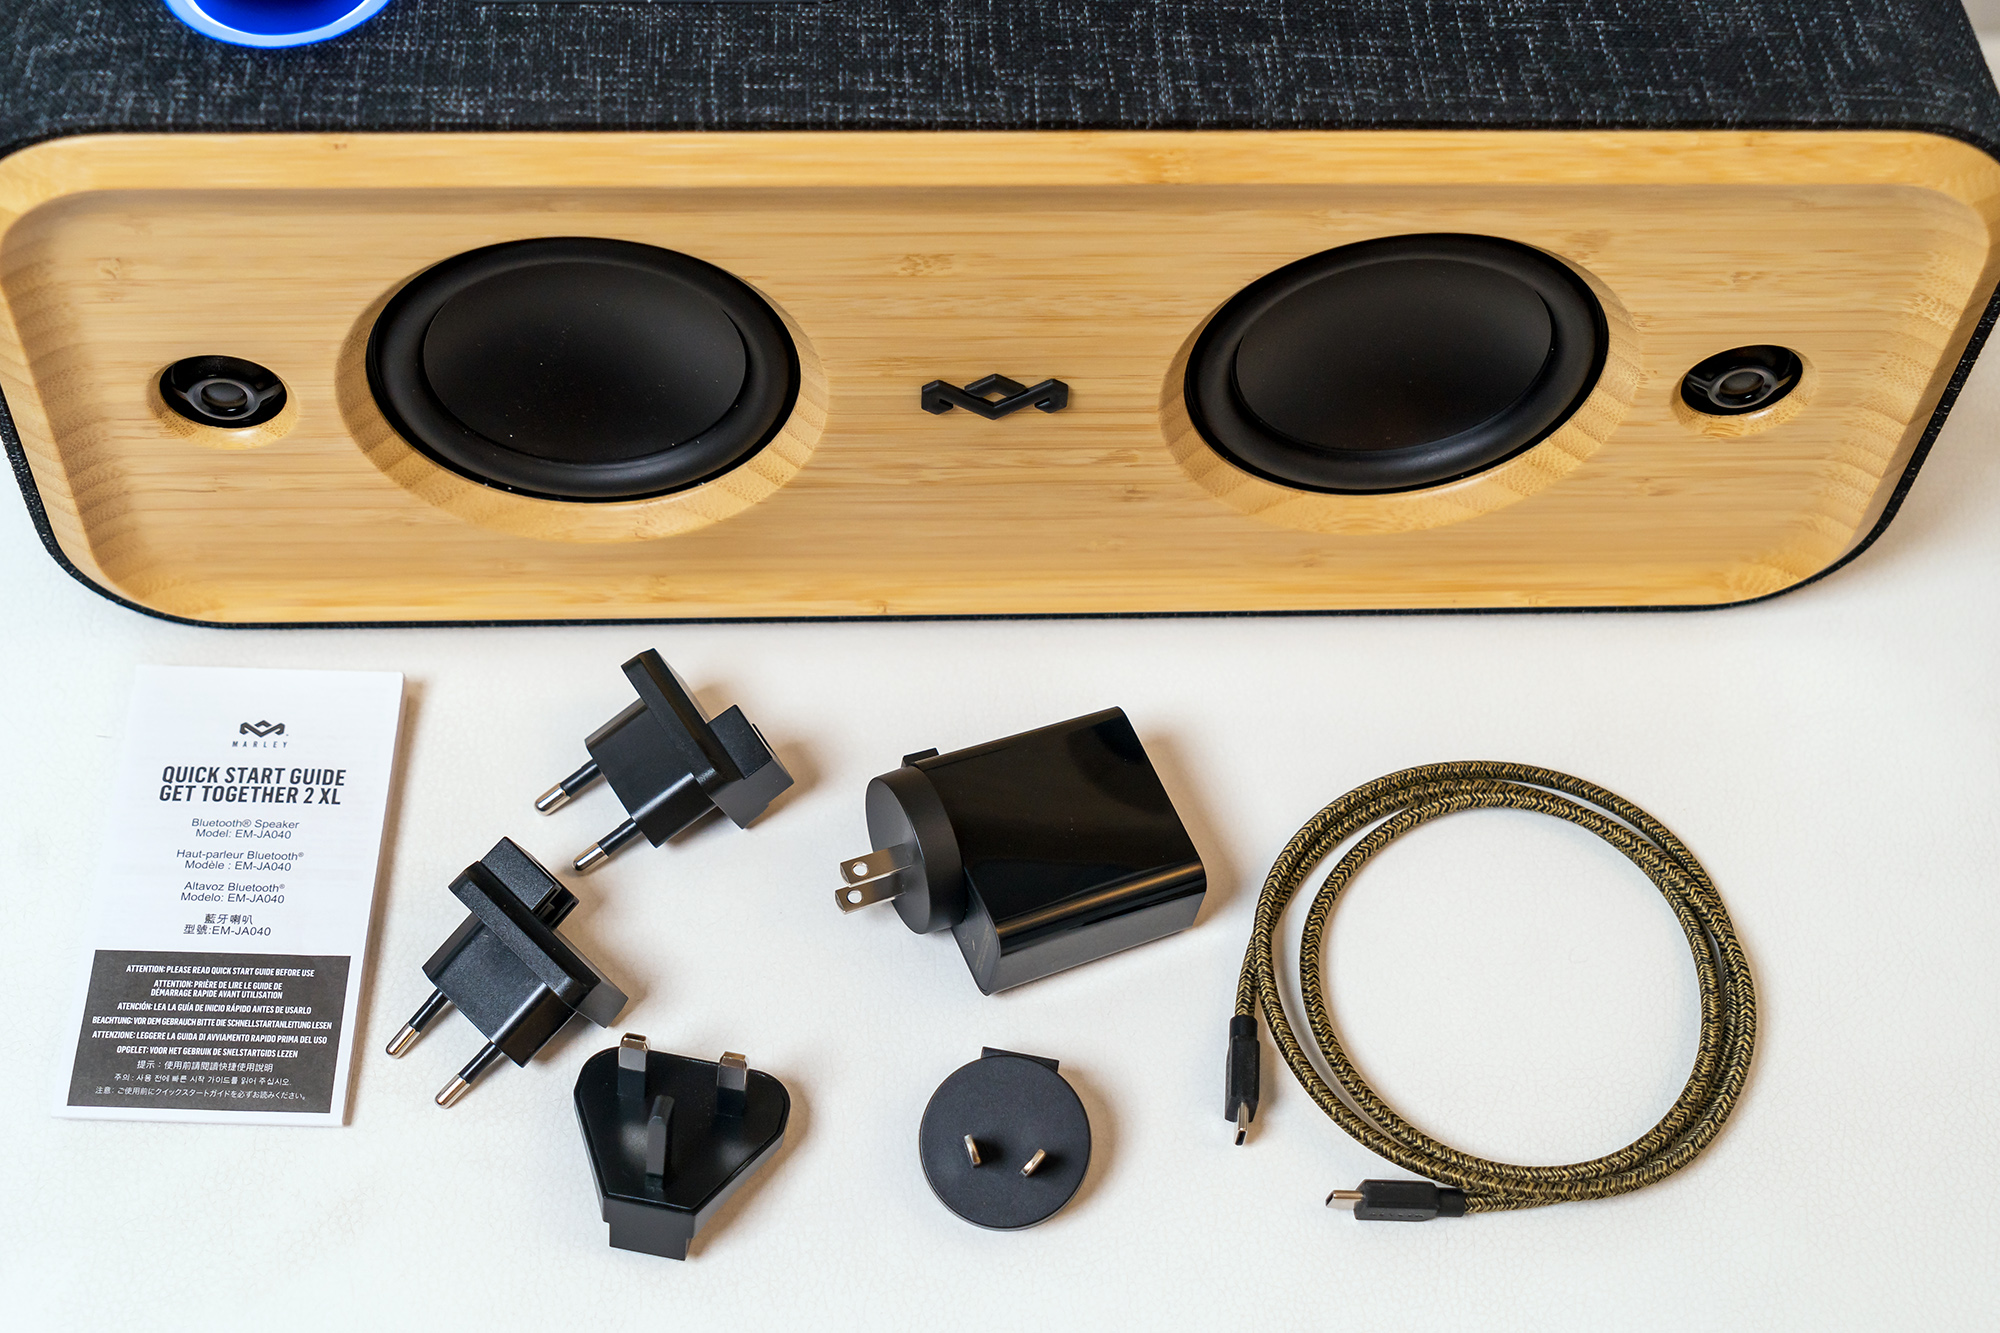 Get Together 2 XL review: The House of Marley speaker to buy